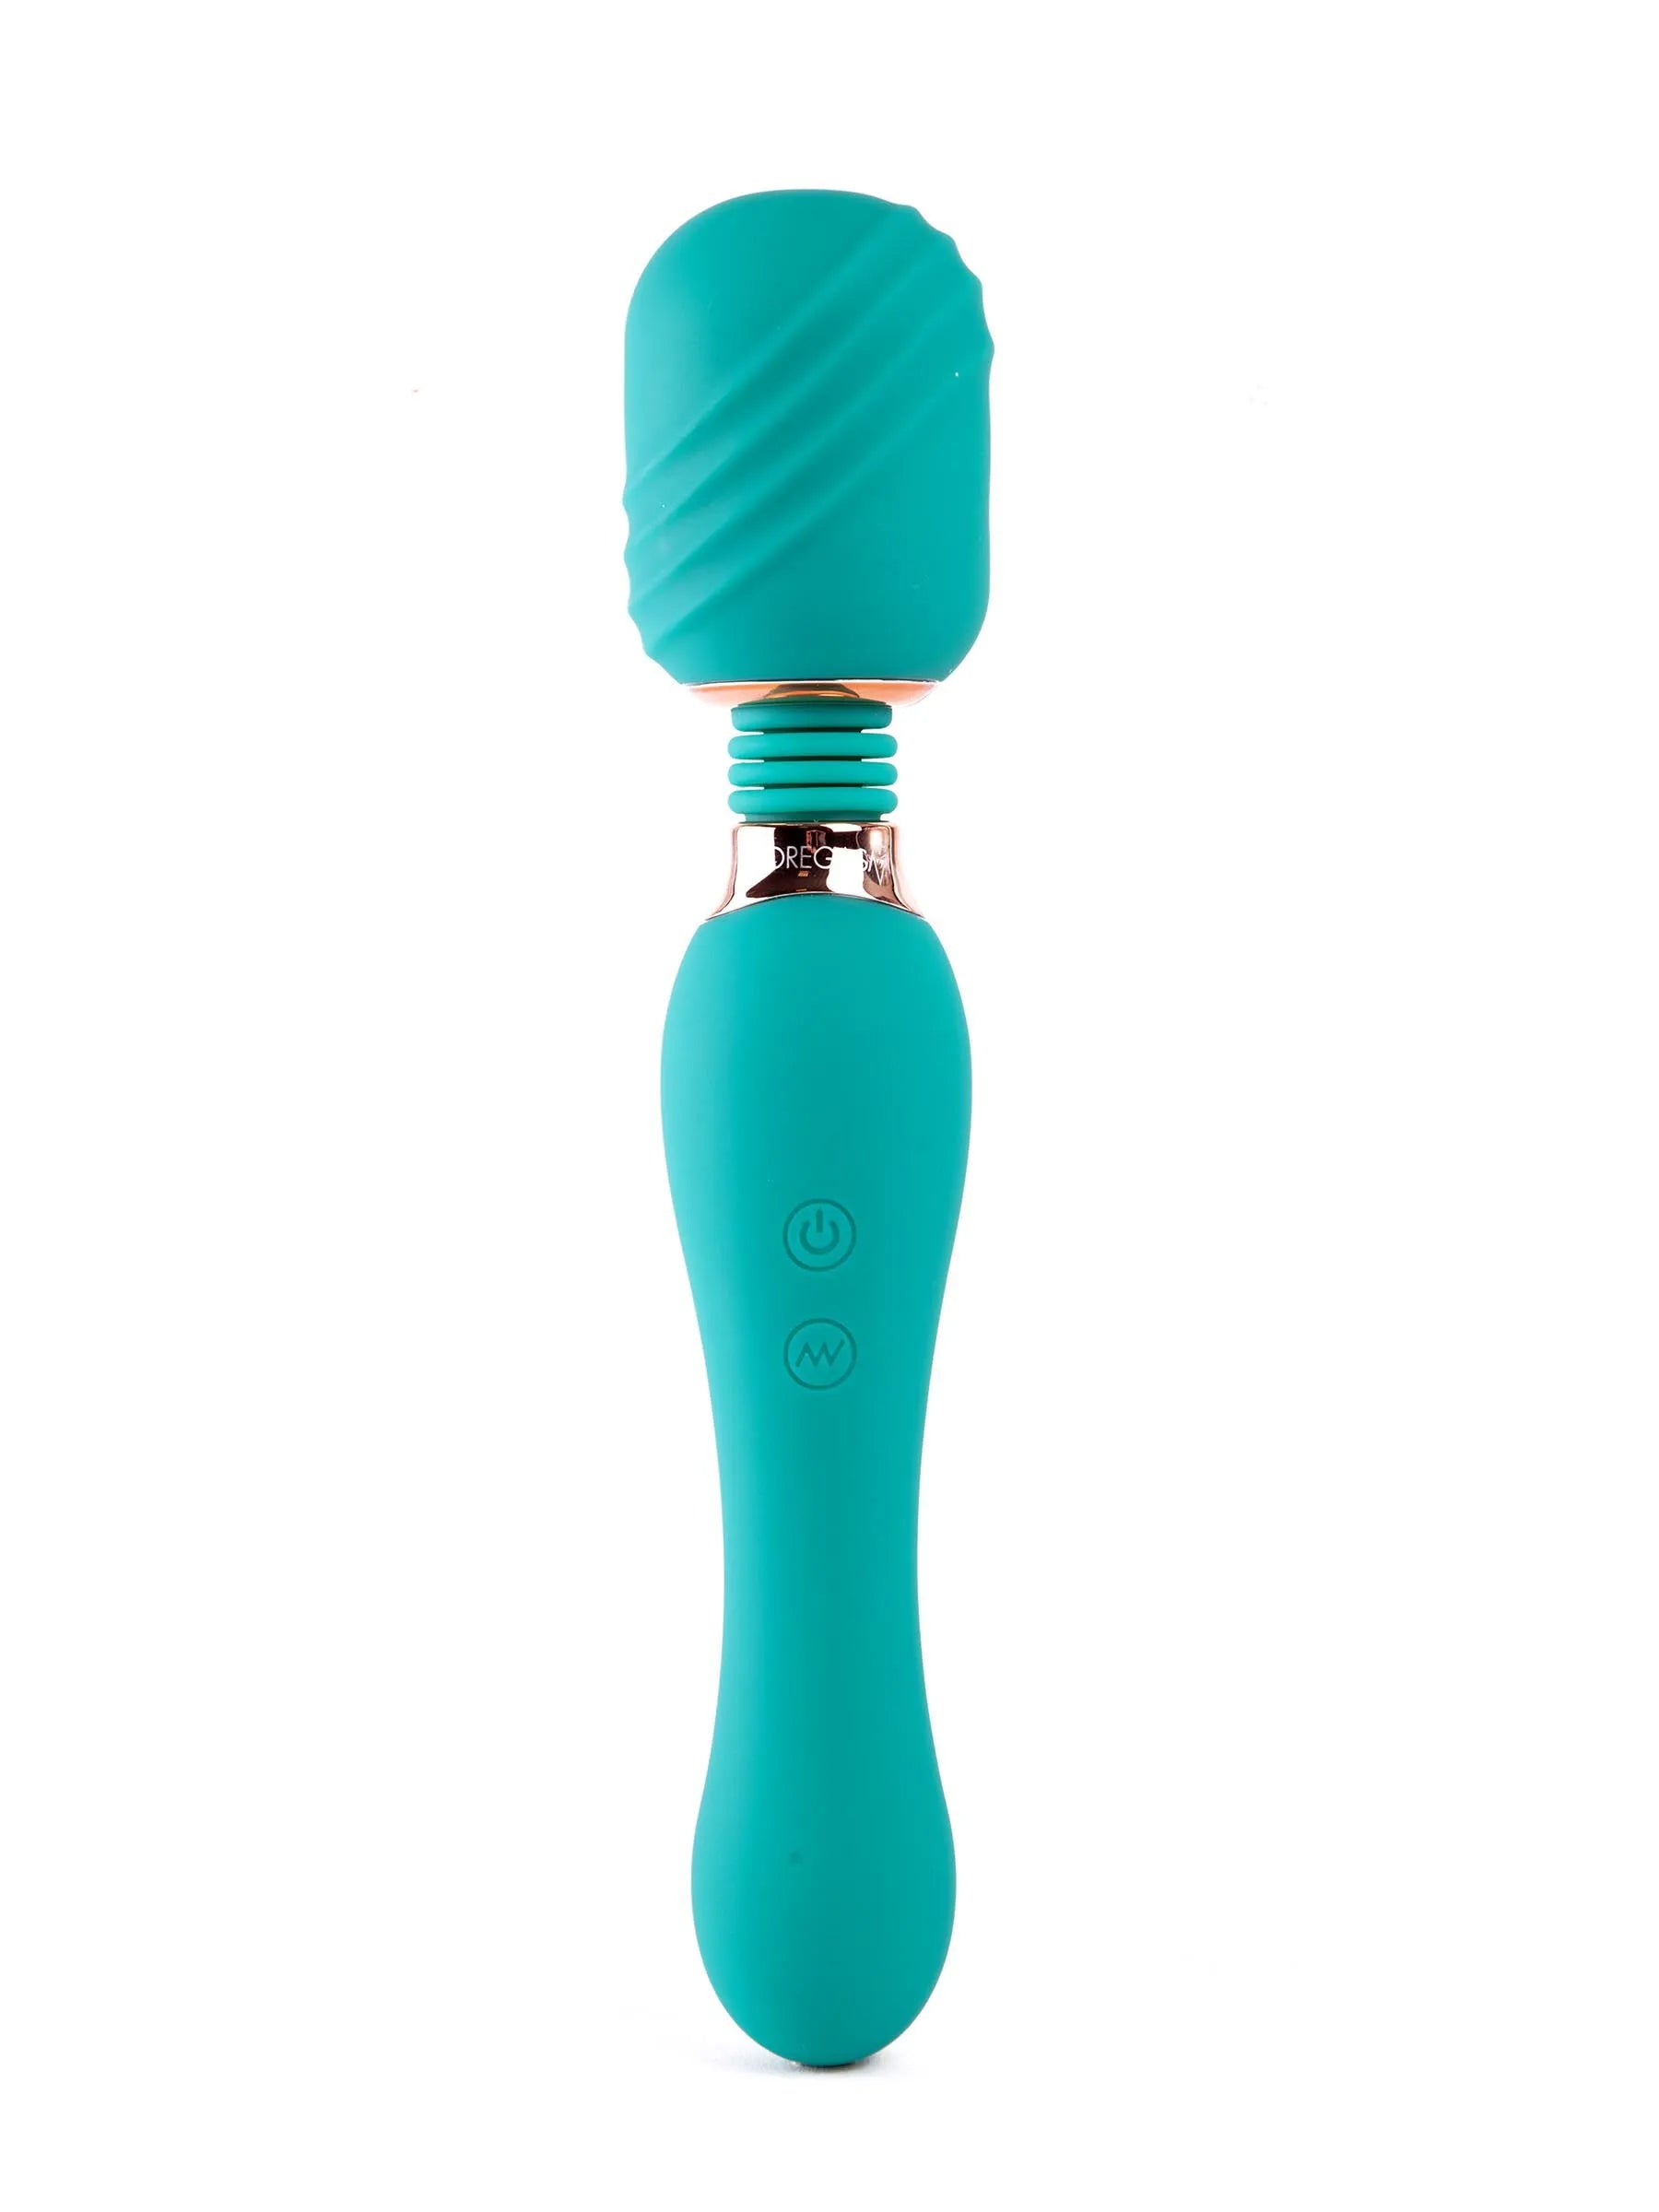 Moregasm Plus Boost Wand From Ann Summers, Image 0